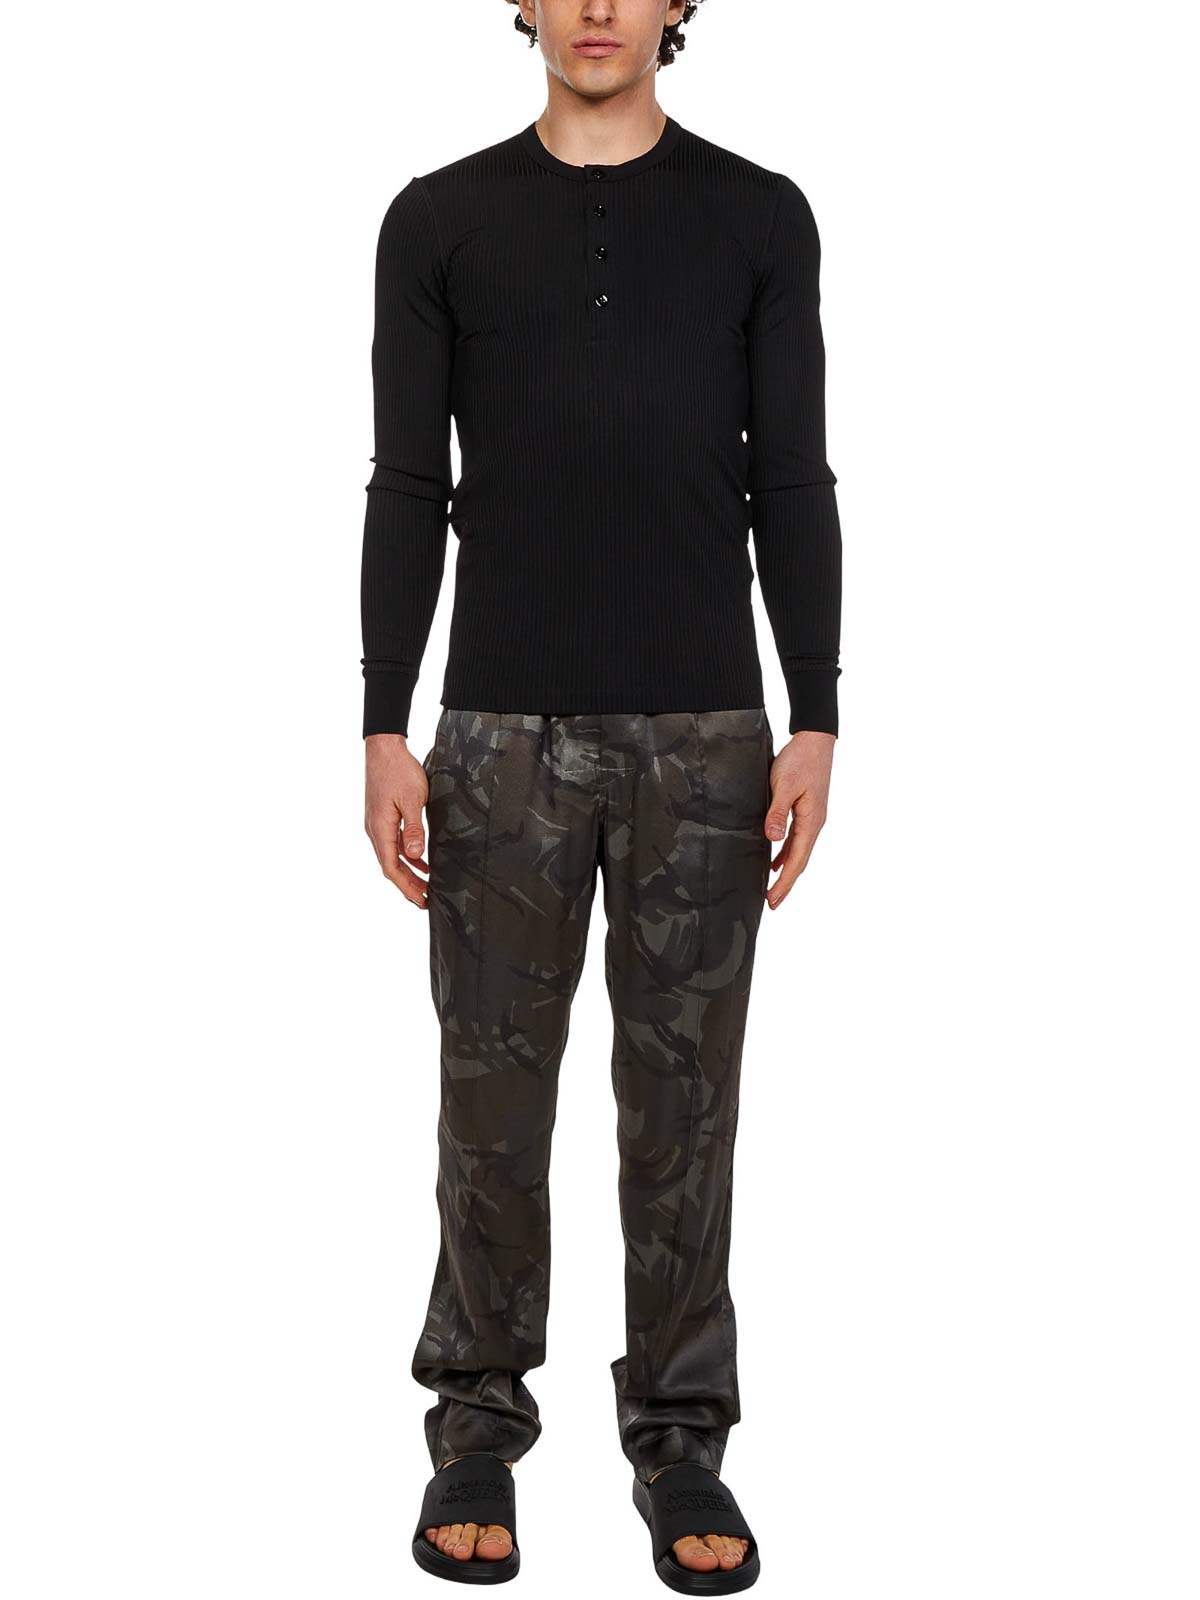 Shop Tom Ford Olive Green Silk Satin Camouflage Pants